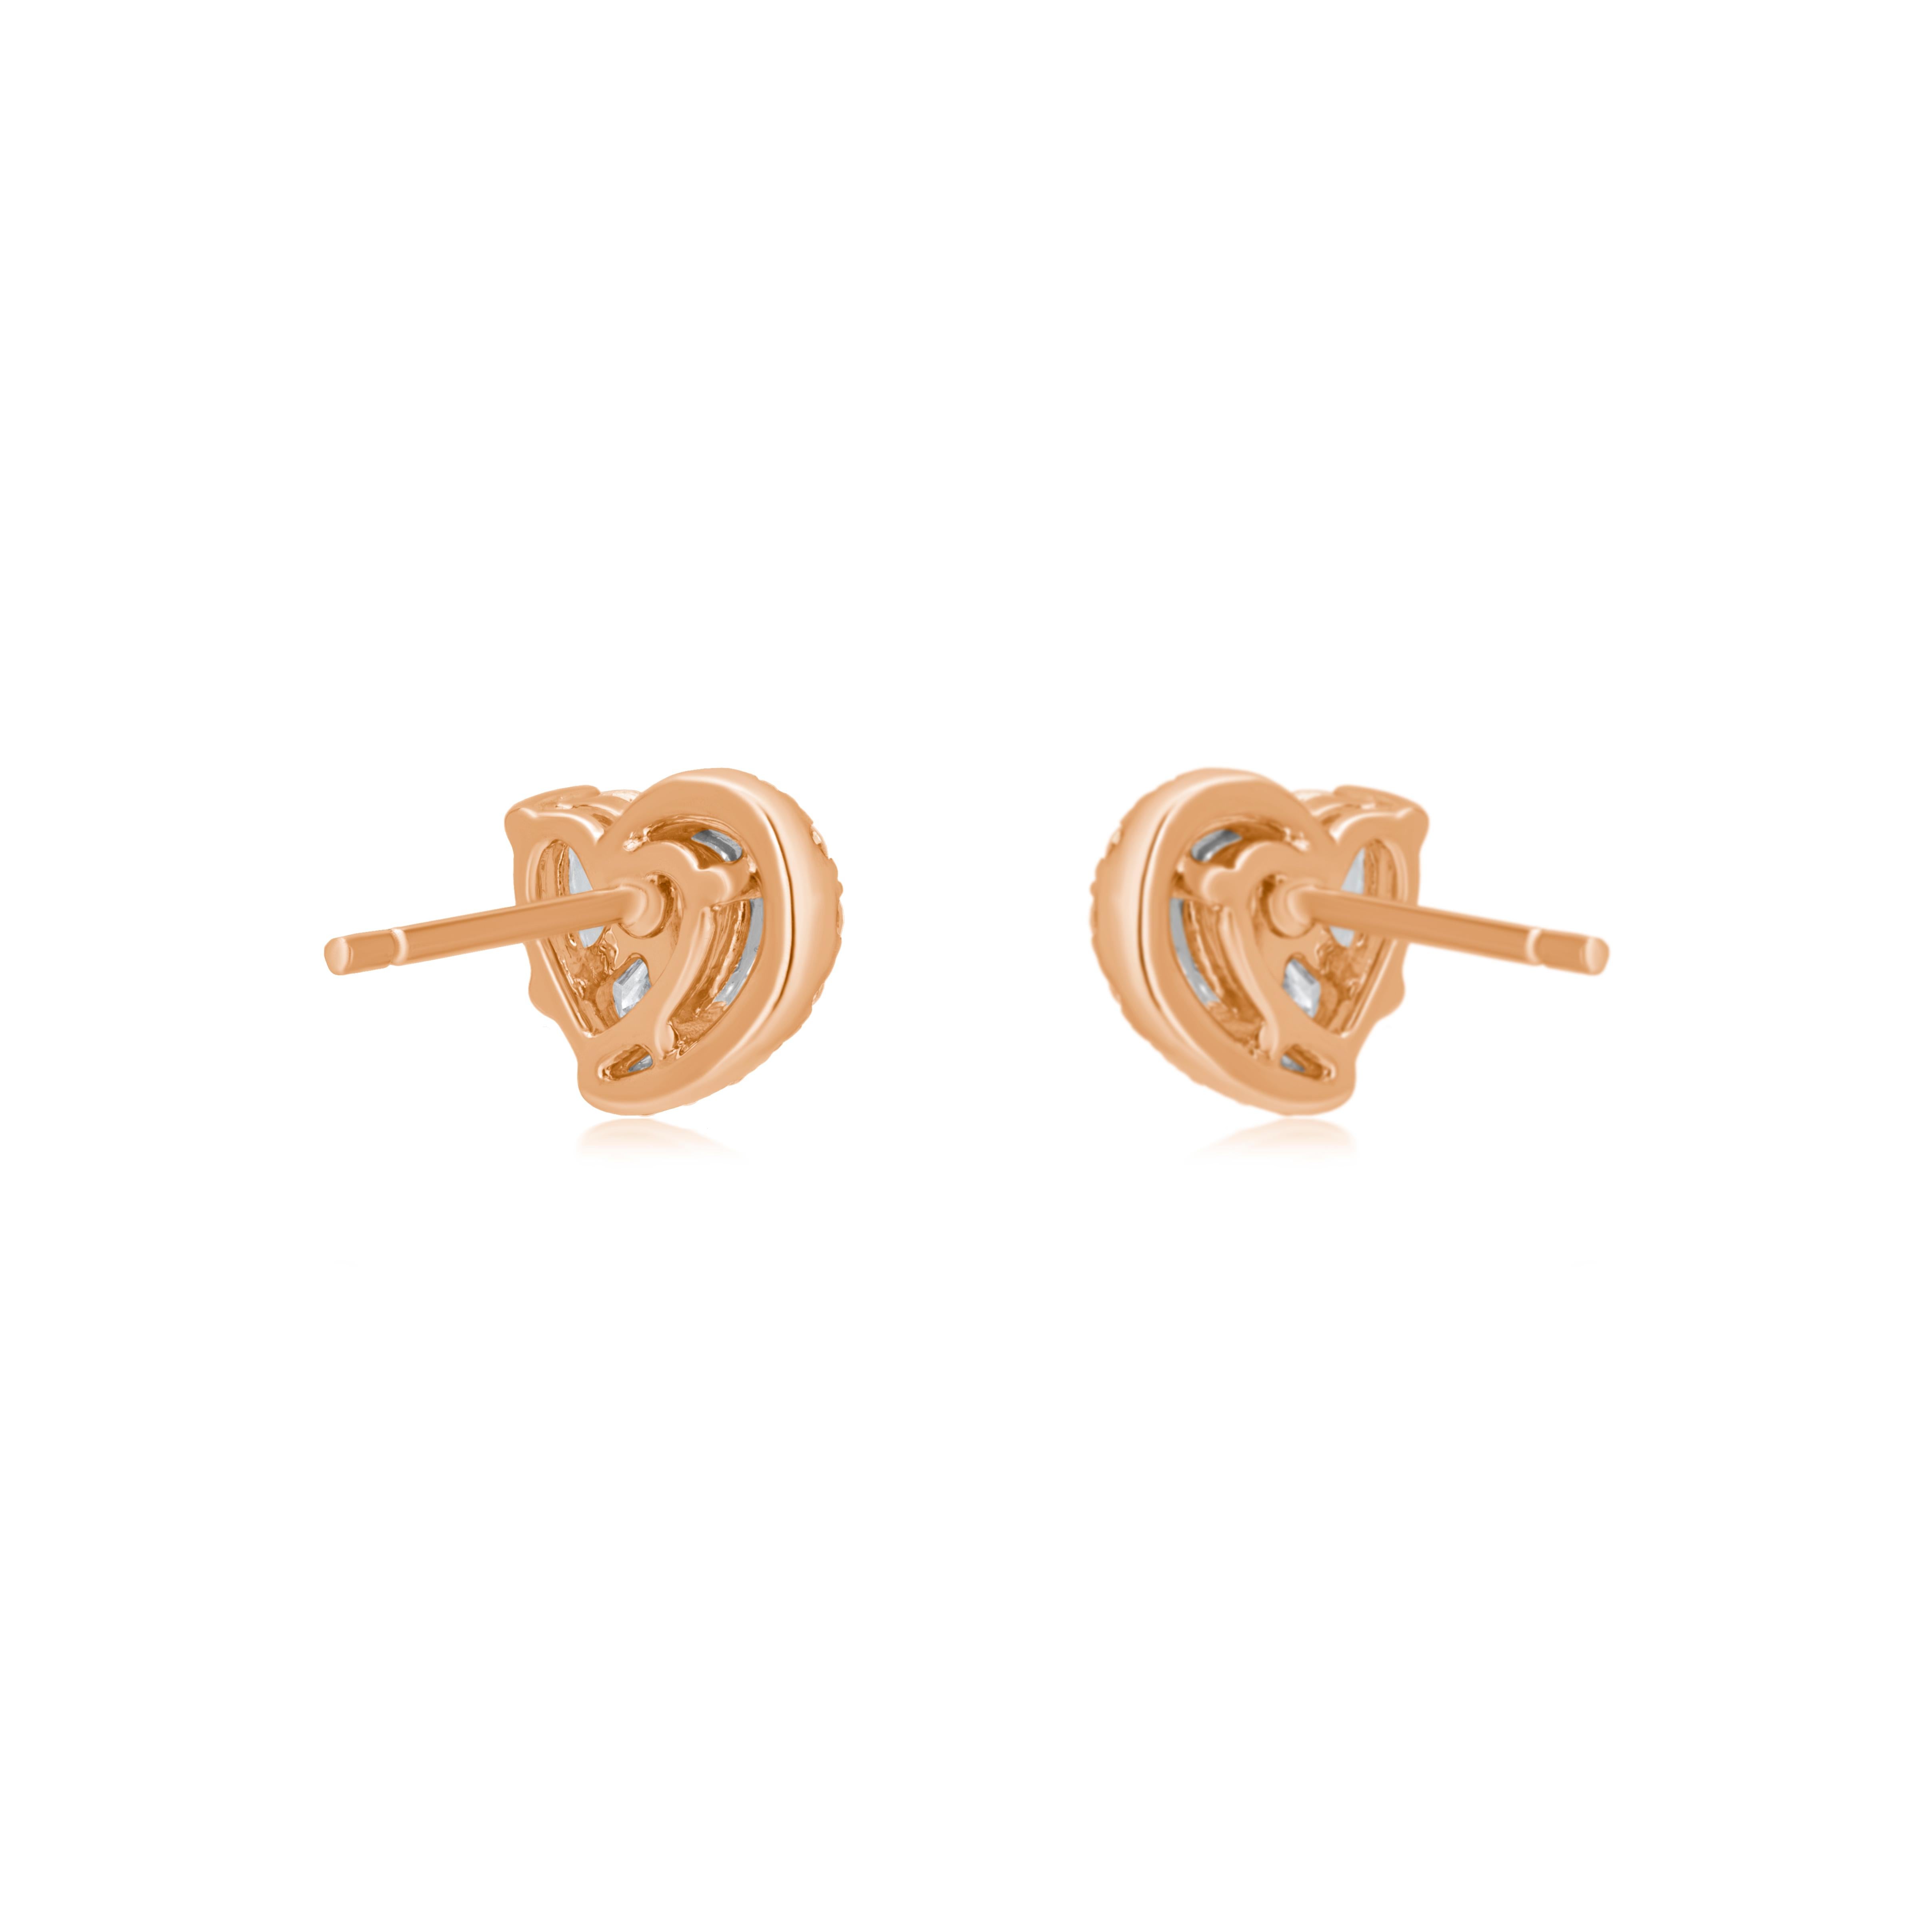 Contemporary Luxle 1.4 Cttw Diamond Heart-Shaped Stud Earrings in 18k Rose Gold For Sale